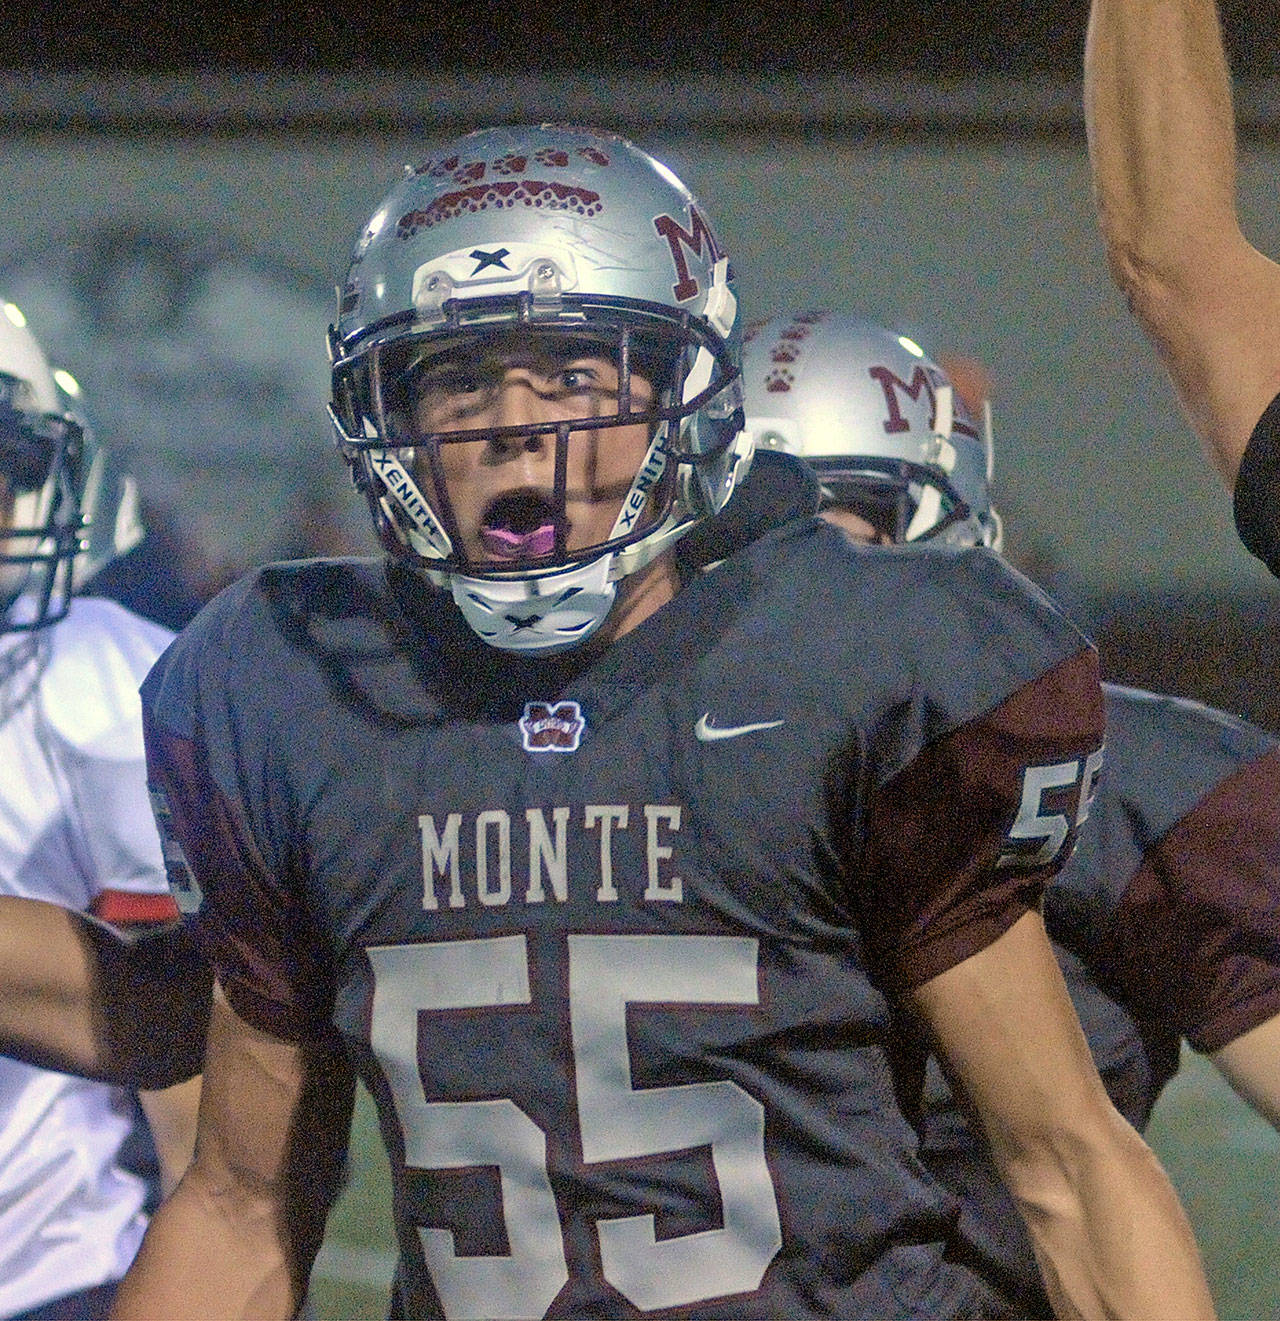 Montesano linebacker Kai Olson recorded 10 tackles (six for a loss) and two sacks to lead Montesano to a crossover game victory on Friday. Olson was named The Daily World’s “Game Ball” winner for defense for his efforts. (File photo)